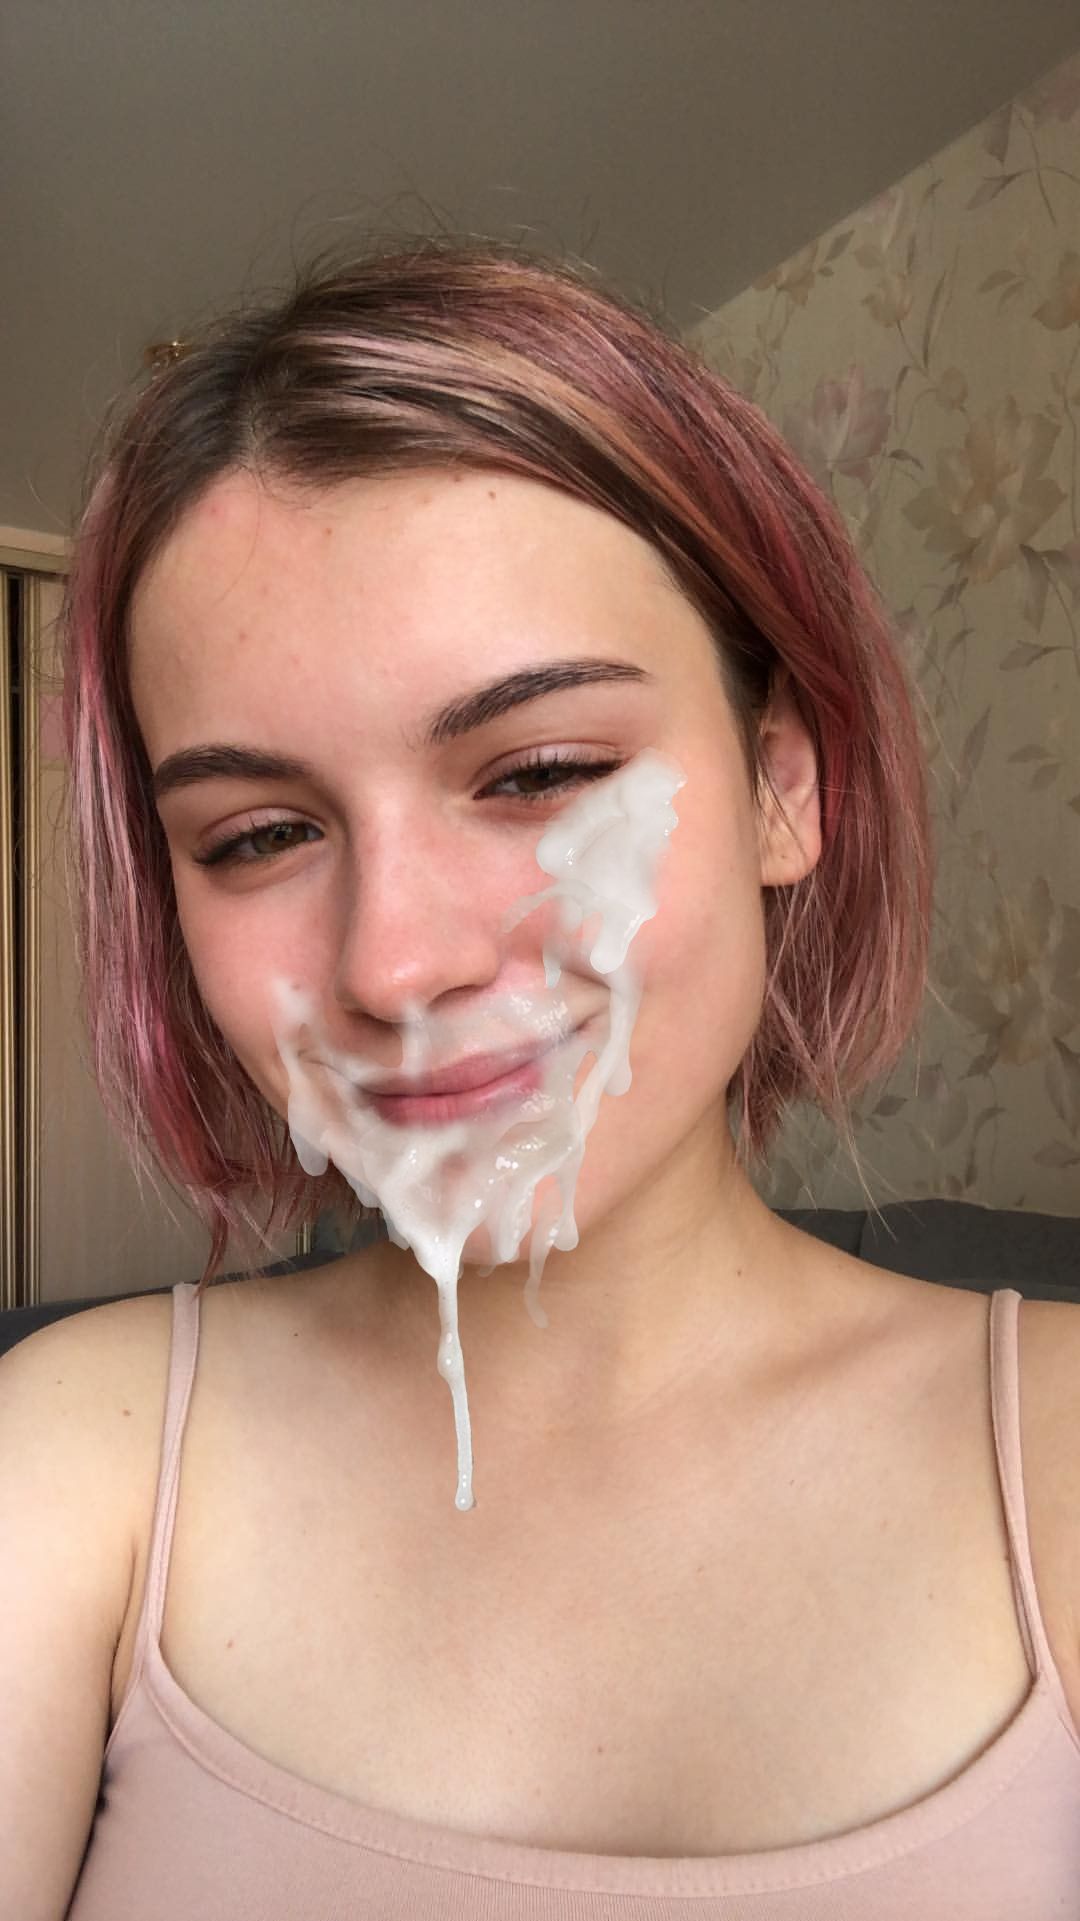 Girl With Cum